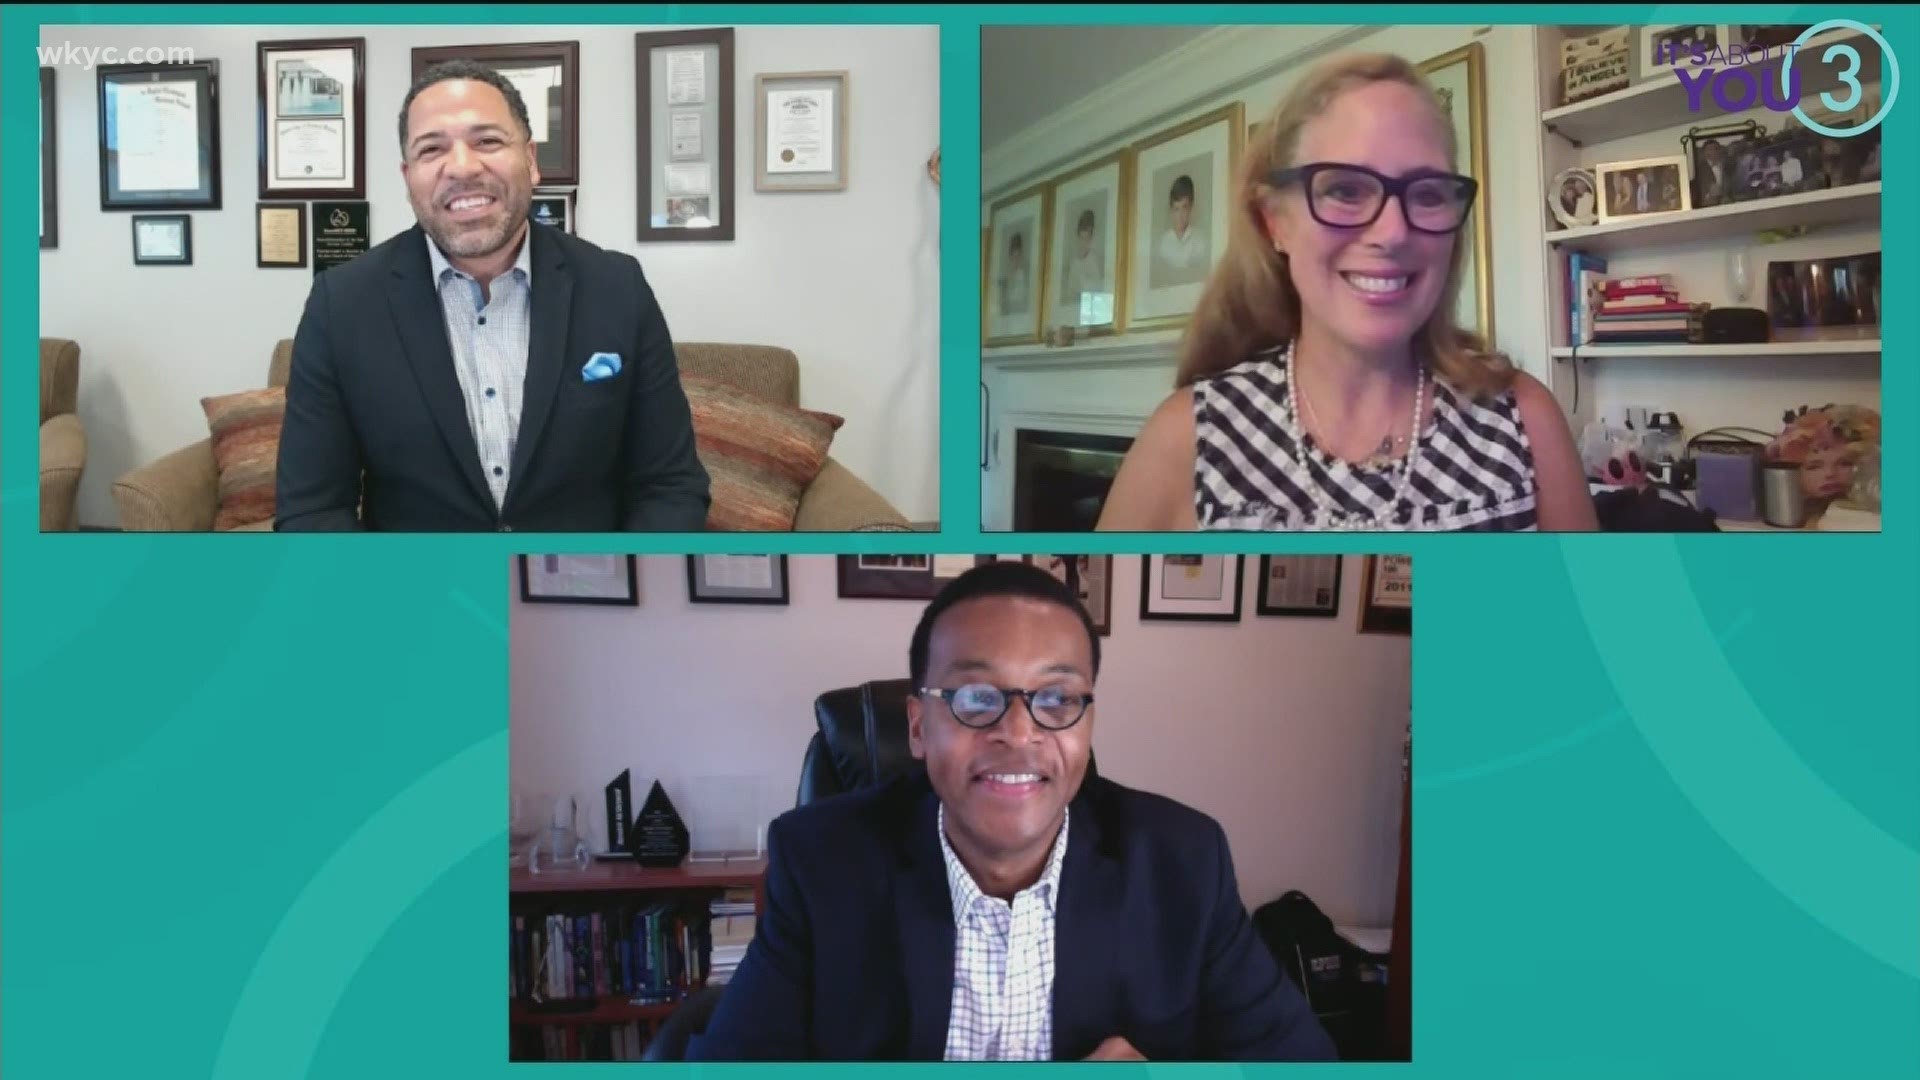 This week's Everyday Champions, Randy McShepard & Elizabeth Voudouris, talk all about their important work with the Minority Pipeline Initiative Taskforce!